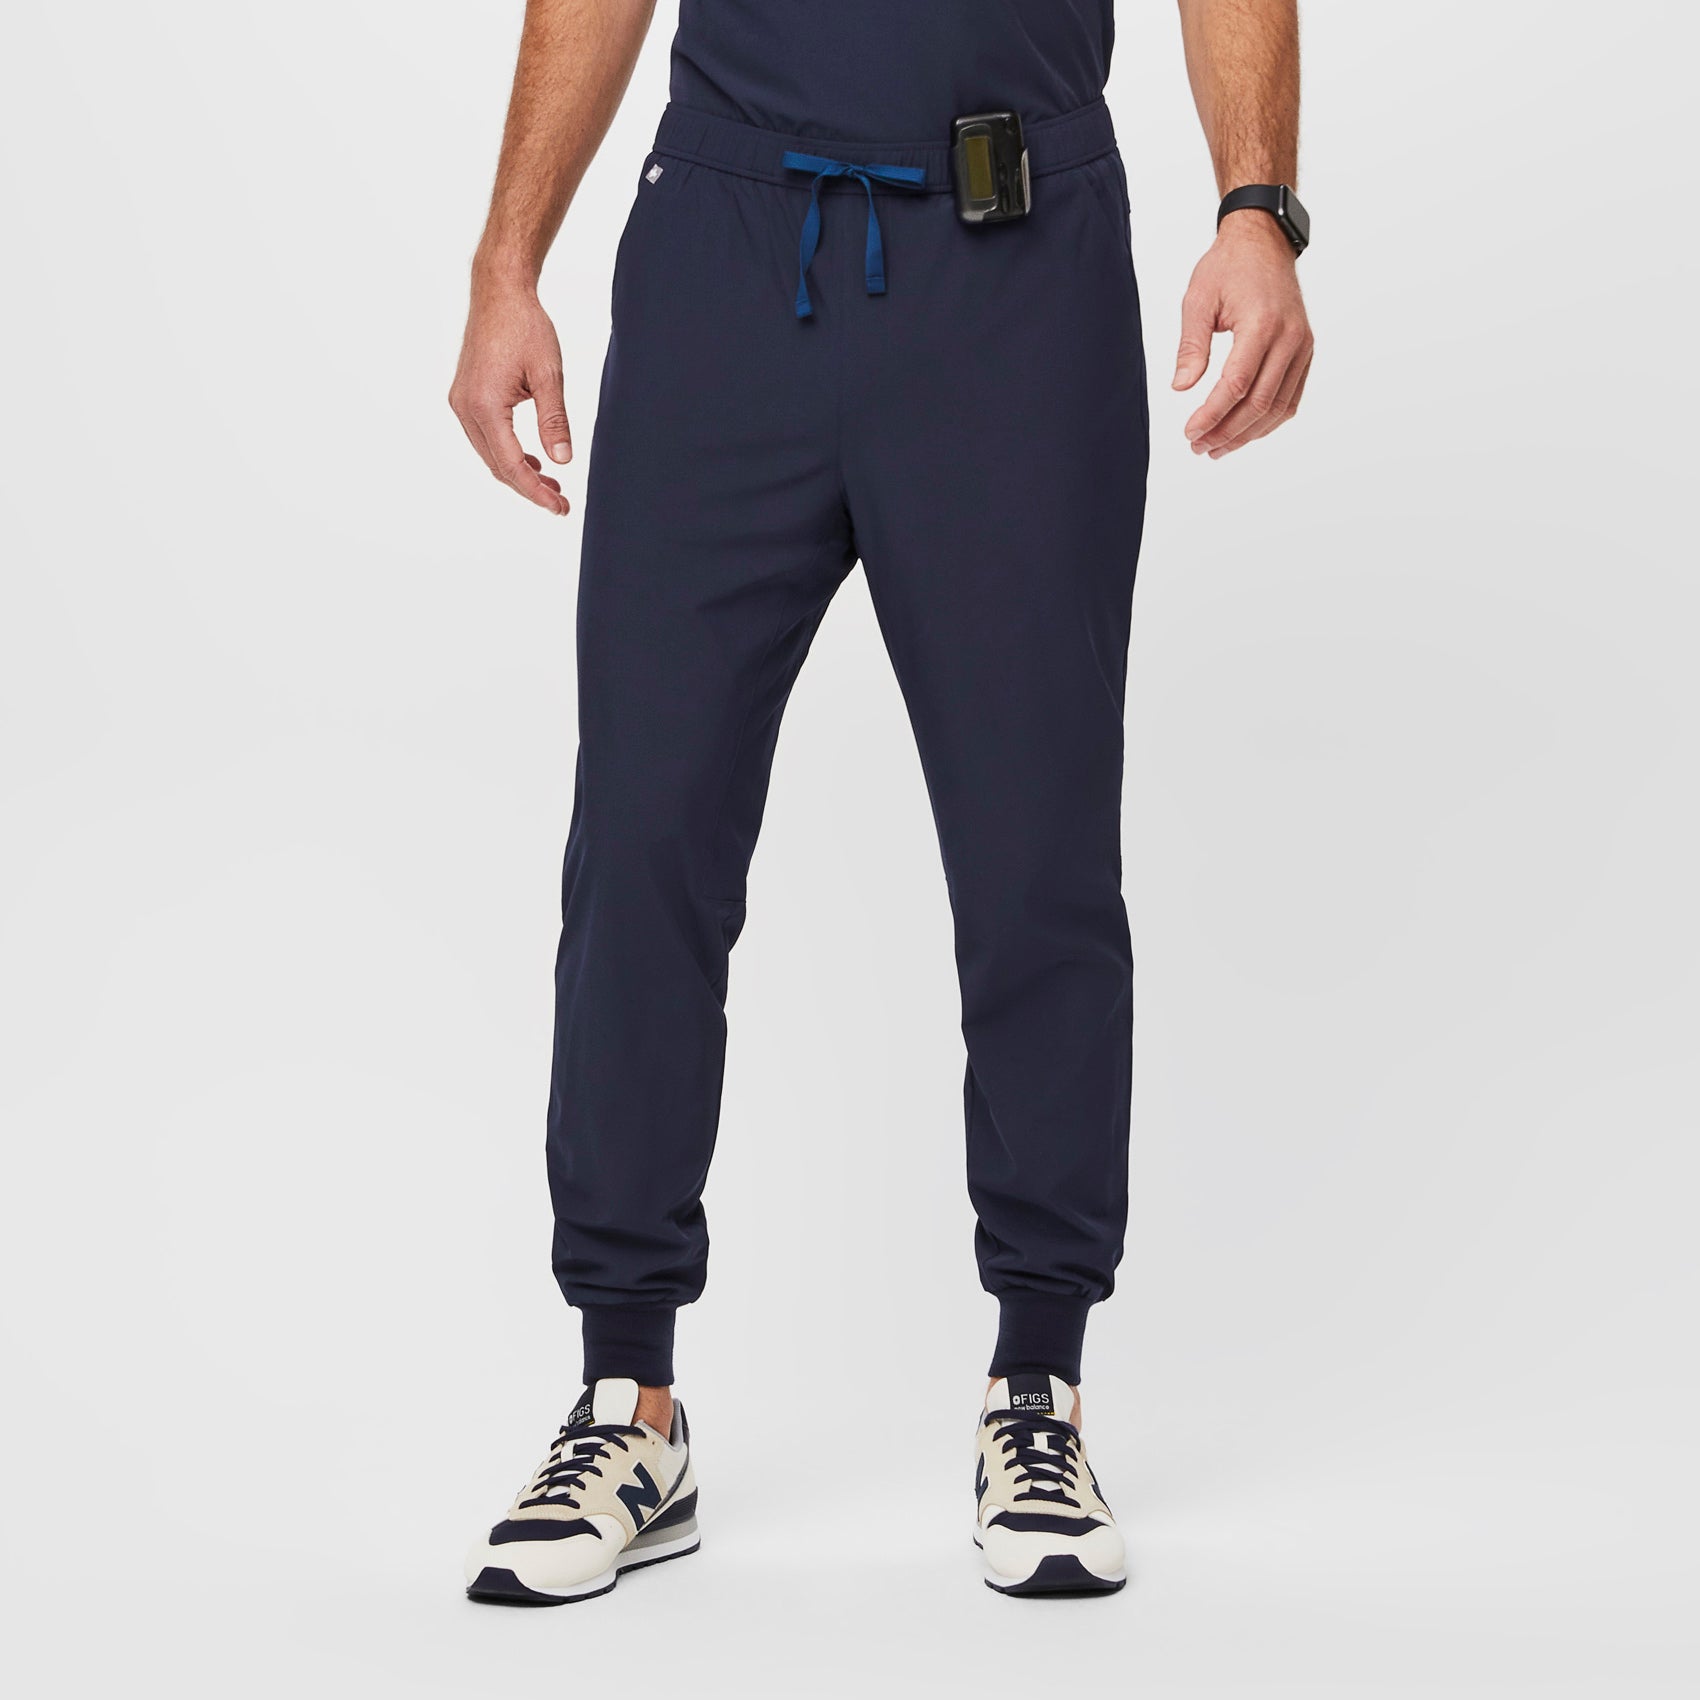 FIGS Tansen Jogger Scrub Pants for Men - Navy Blue, Tall XS : Buy Online at  Best Price in KSA - Souq is now : Fashion